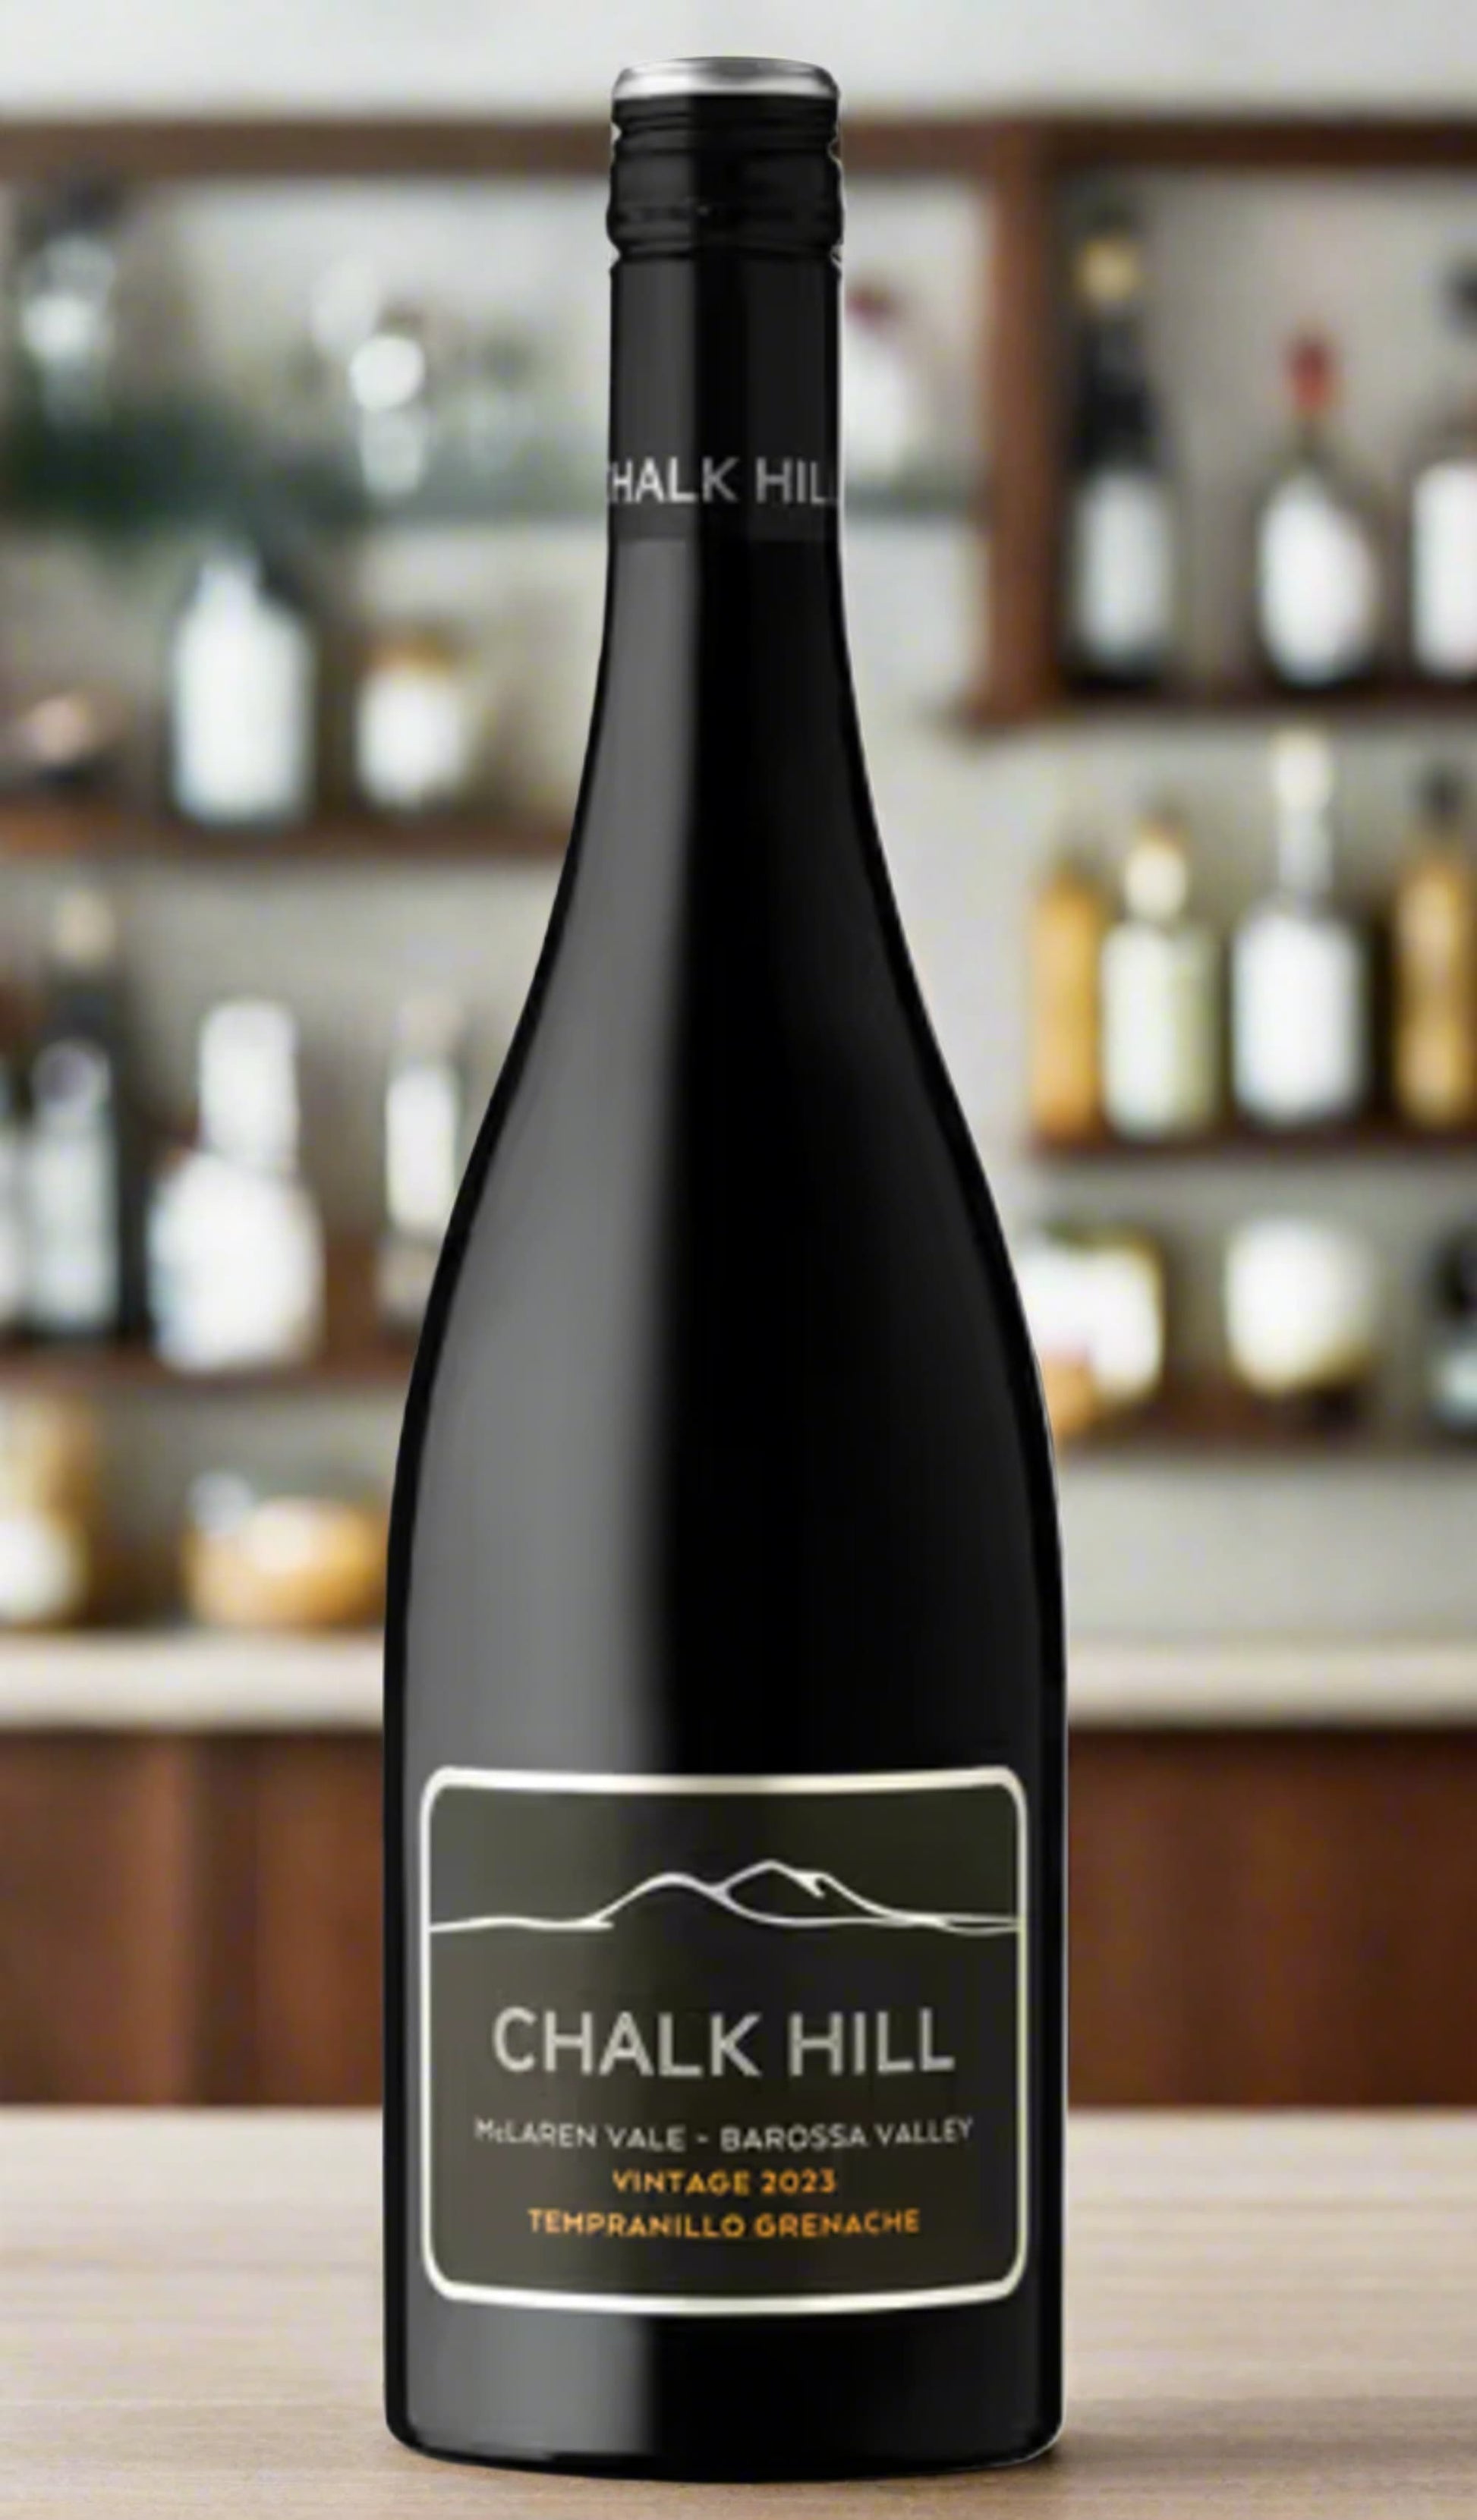 Find out more, explore the range and purchase the award winning Chalk Hill Tempranillo Grenache 2023 (McLaren Vale & Barossa Valley) available online at Wine Sellers Direct - Australia's independent liquor specialists.